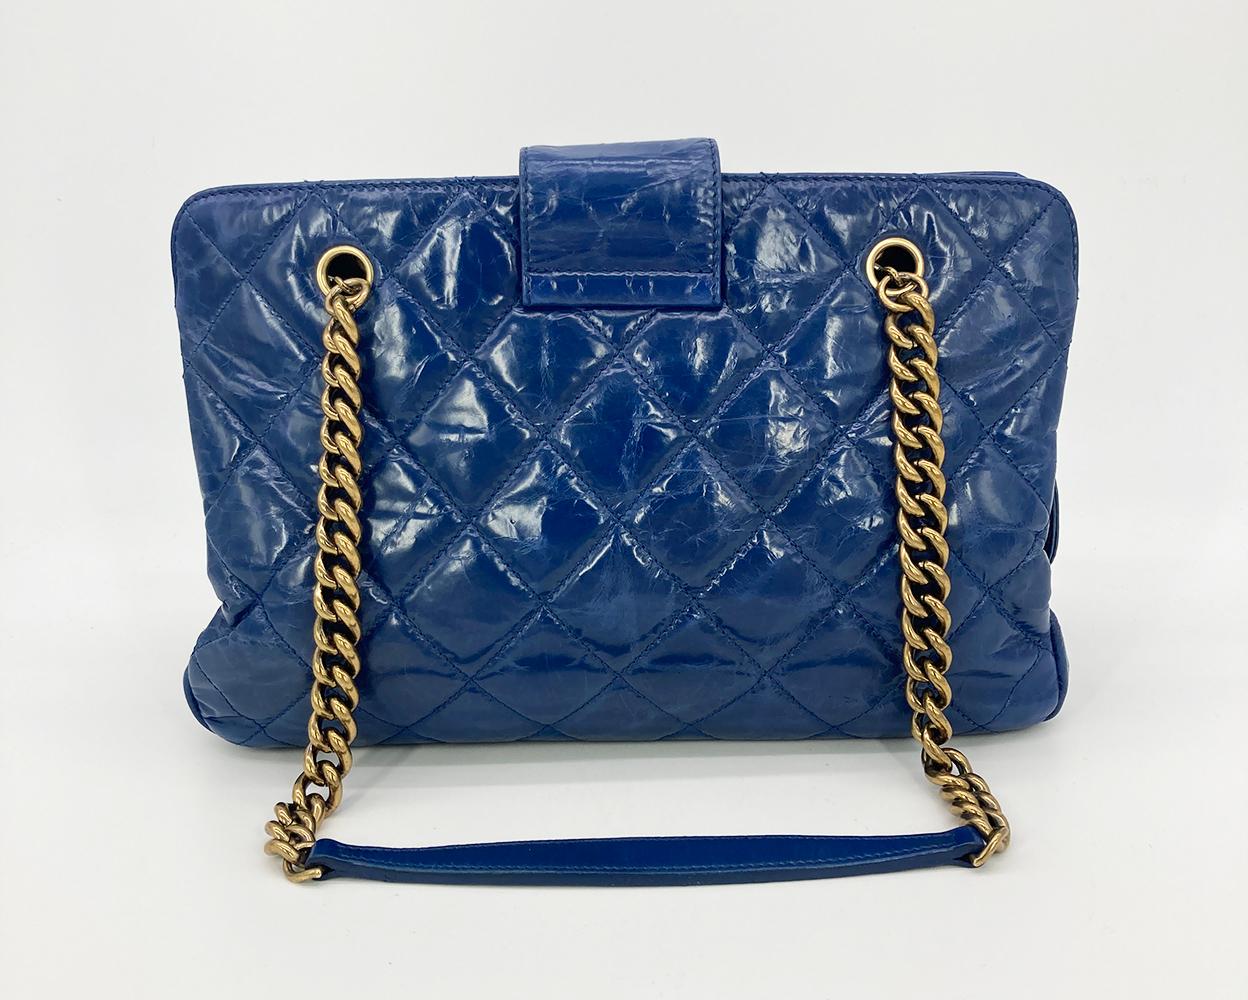 Chanel Blue Glazed Calfskin Quilted Tote Bag In Good Condition For Sale In Philadelphia, PA